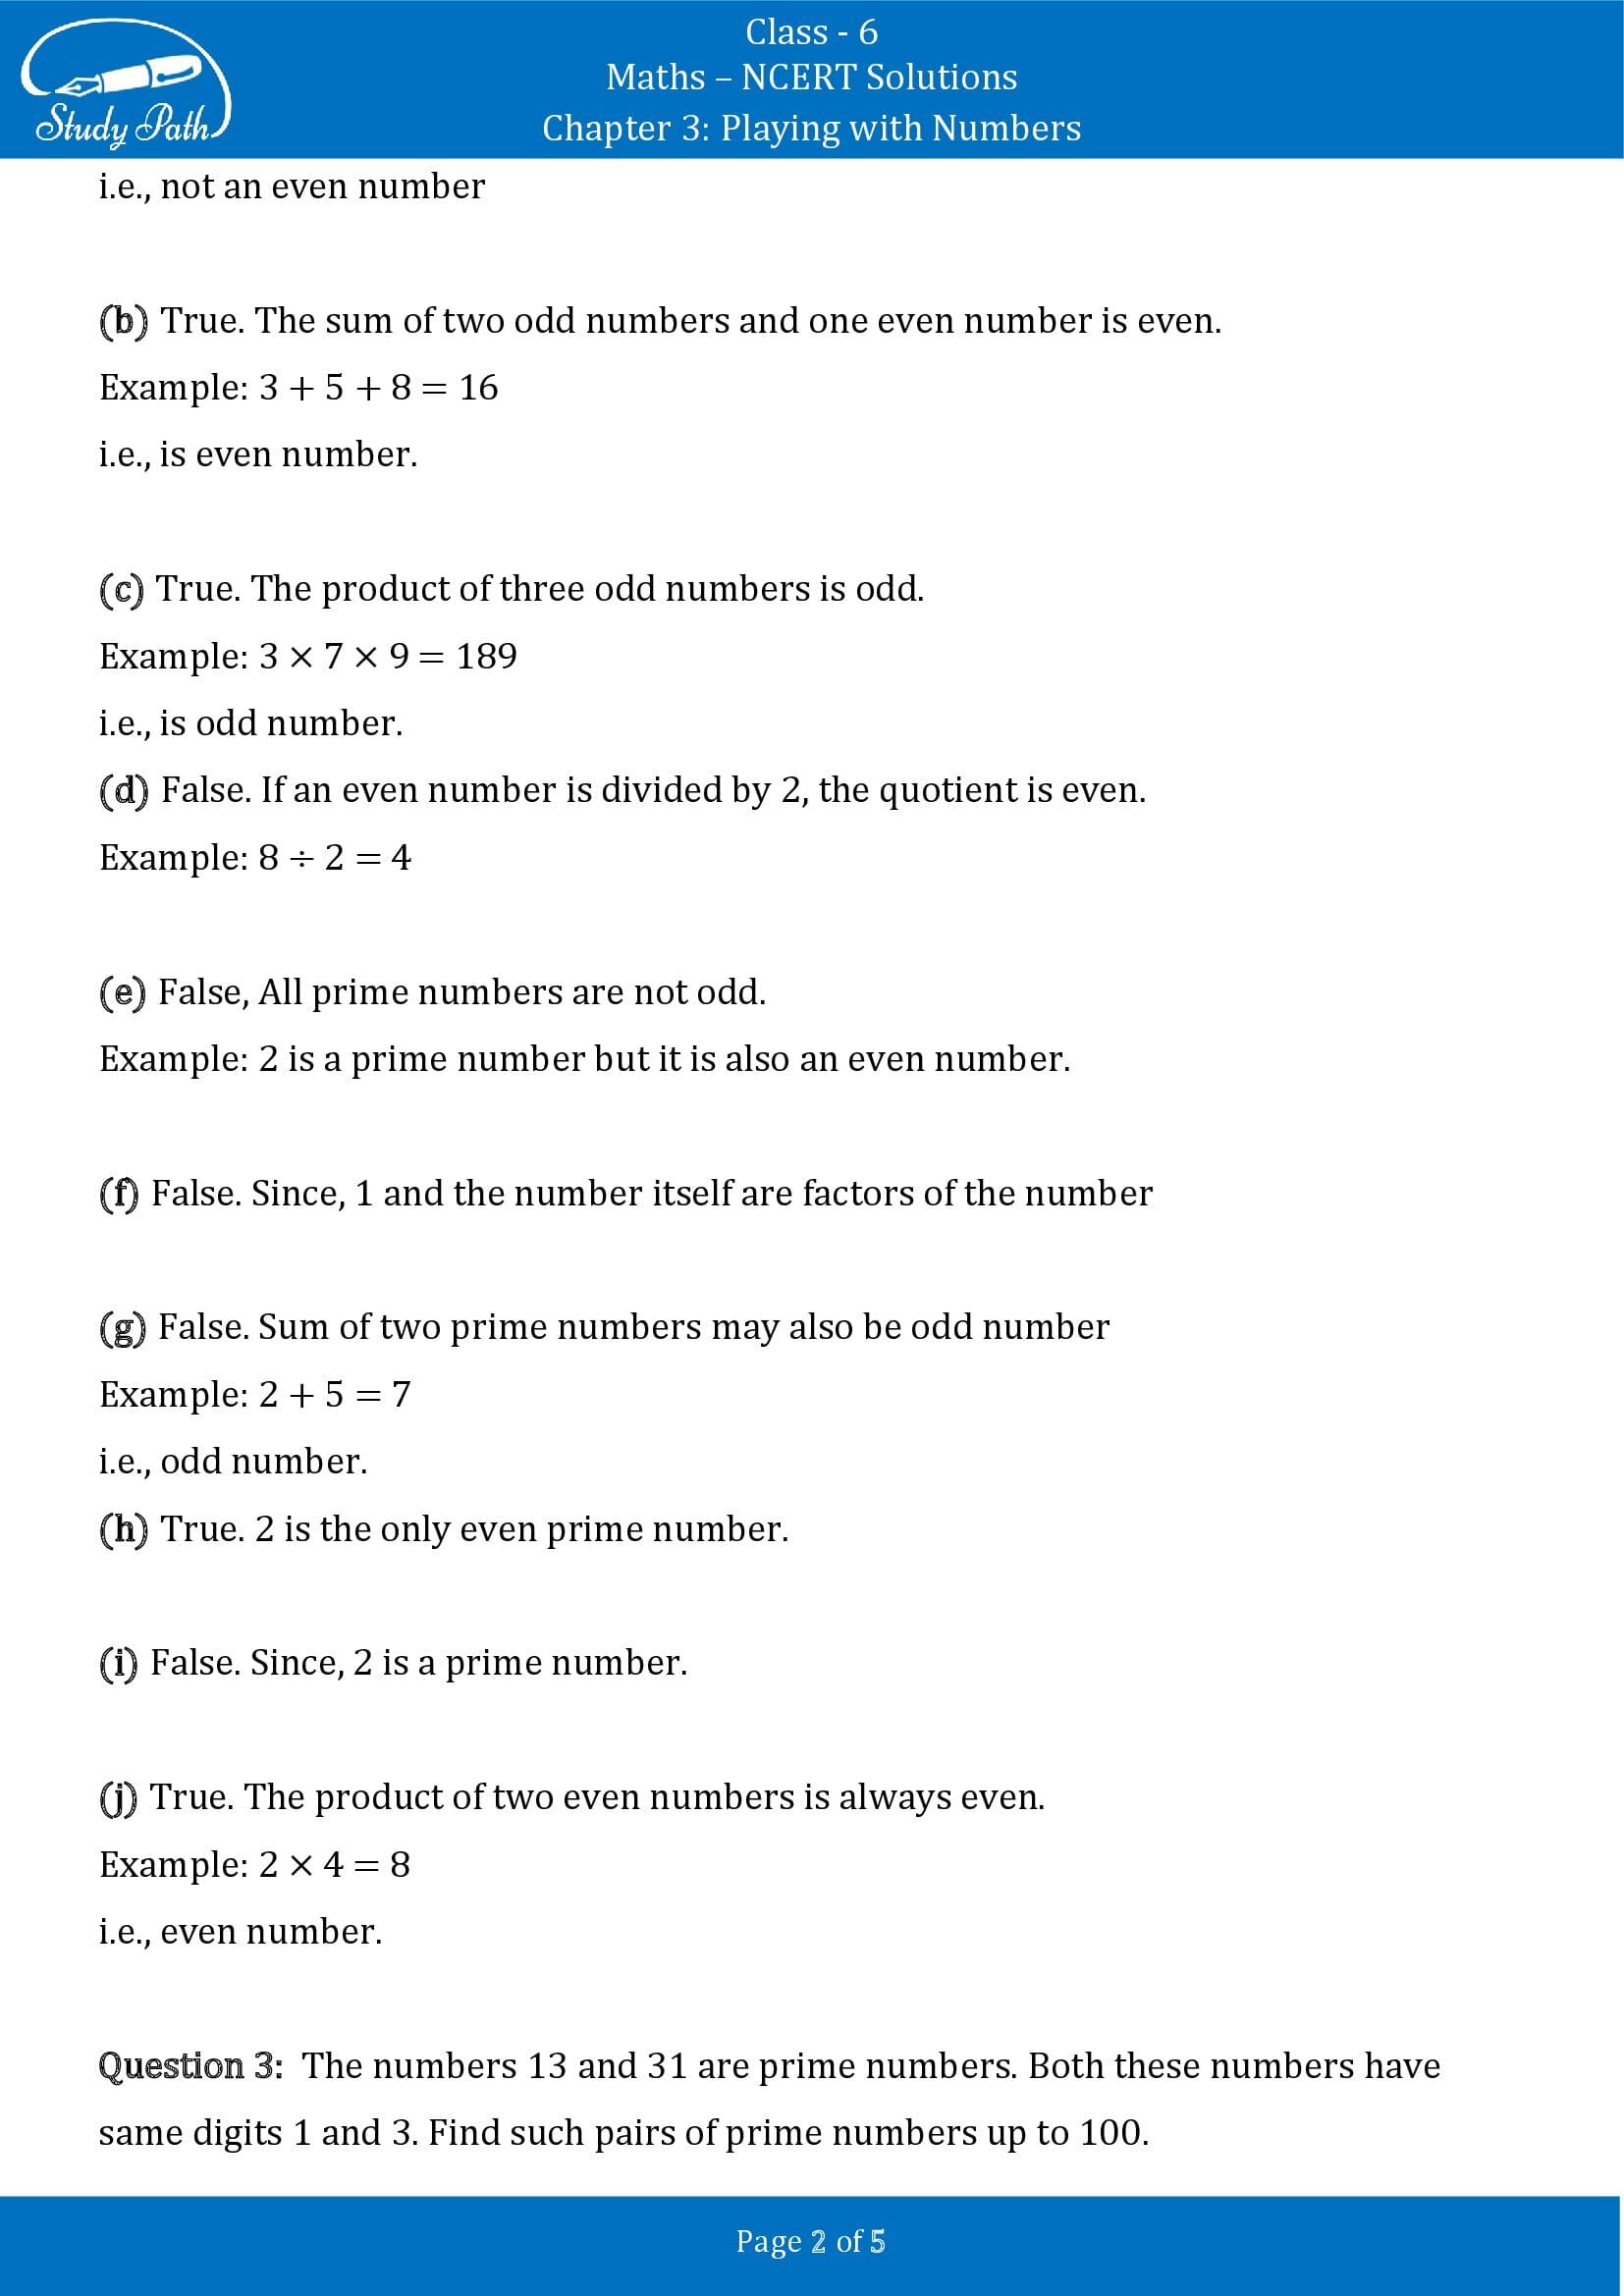 NCERT Solutions for Class 6 Maths Chapter 3 Playing with Numbers Exercise 3.2 00002